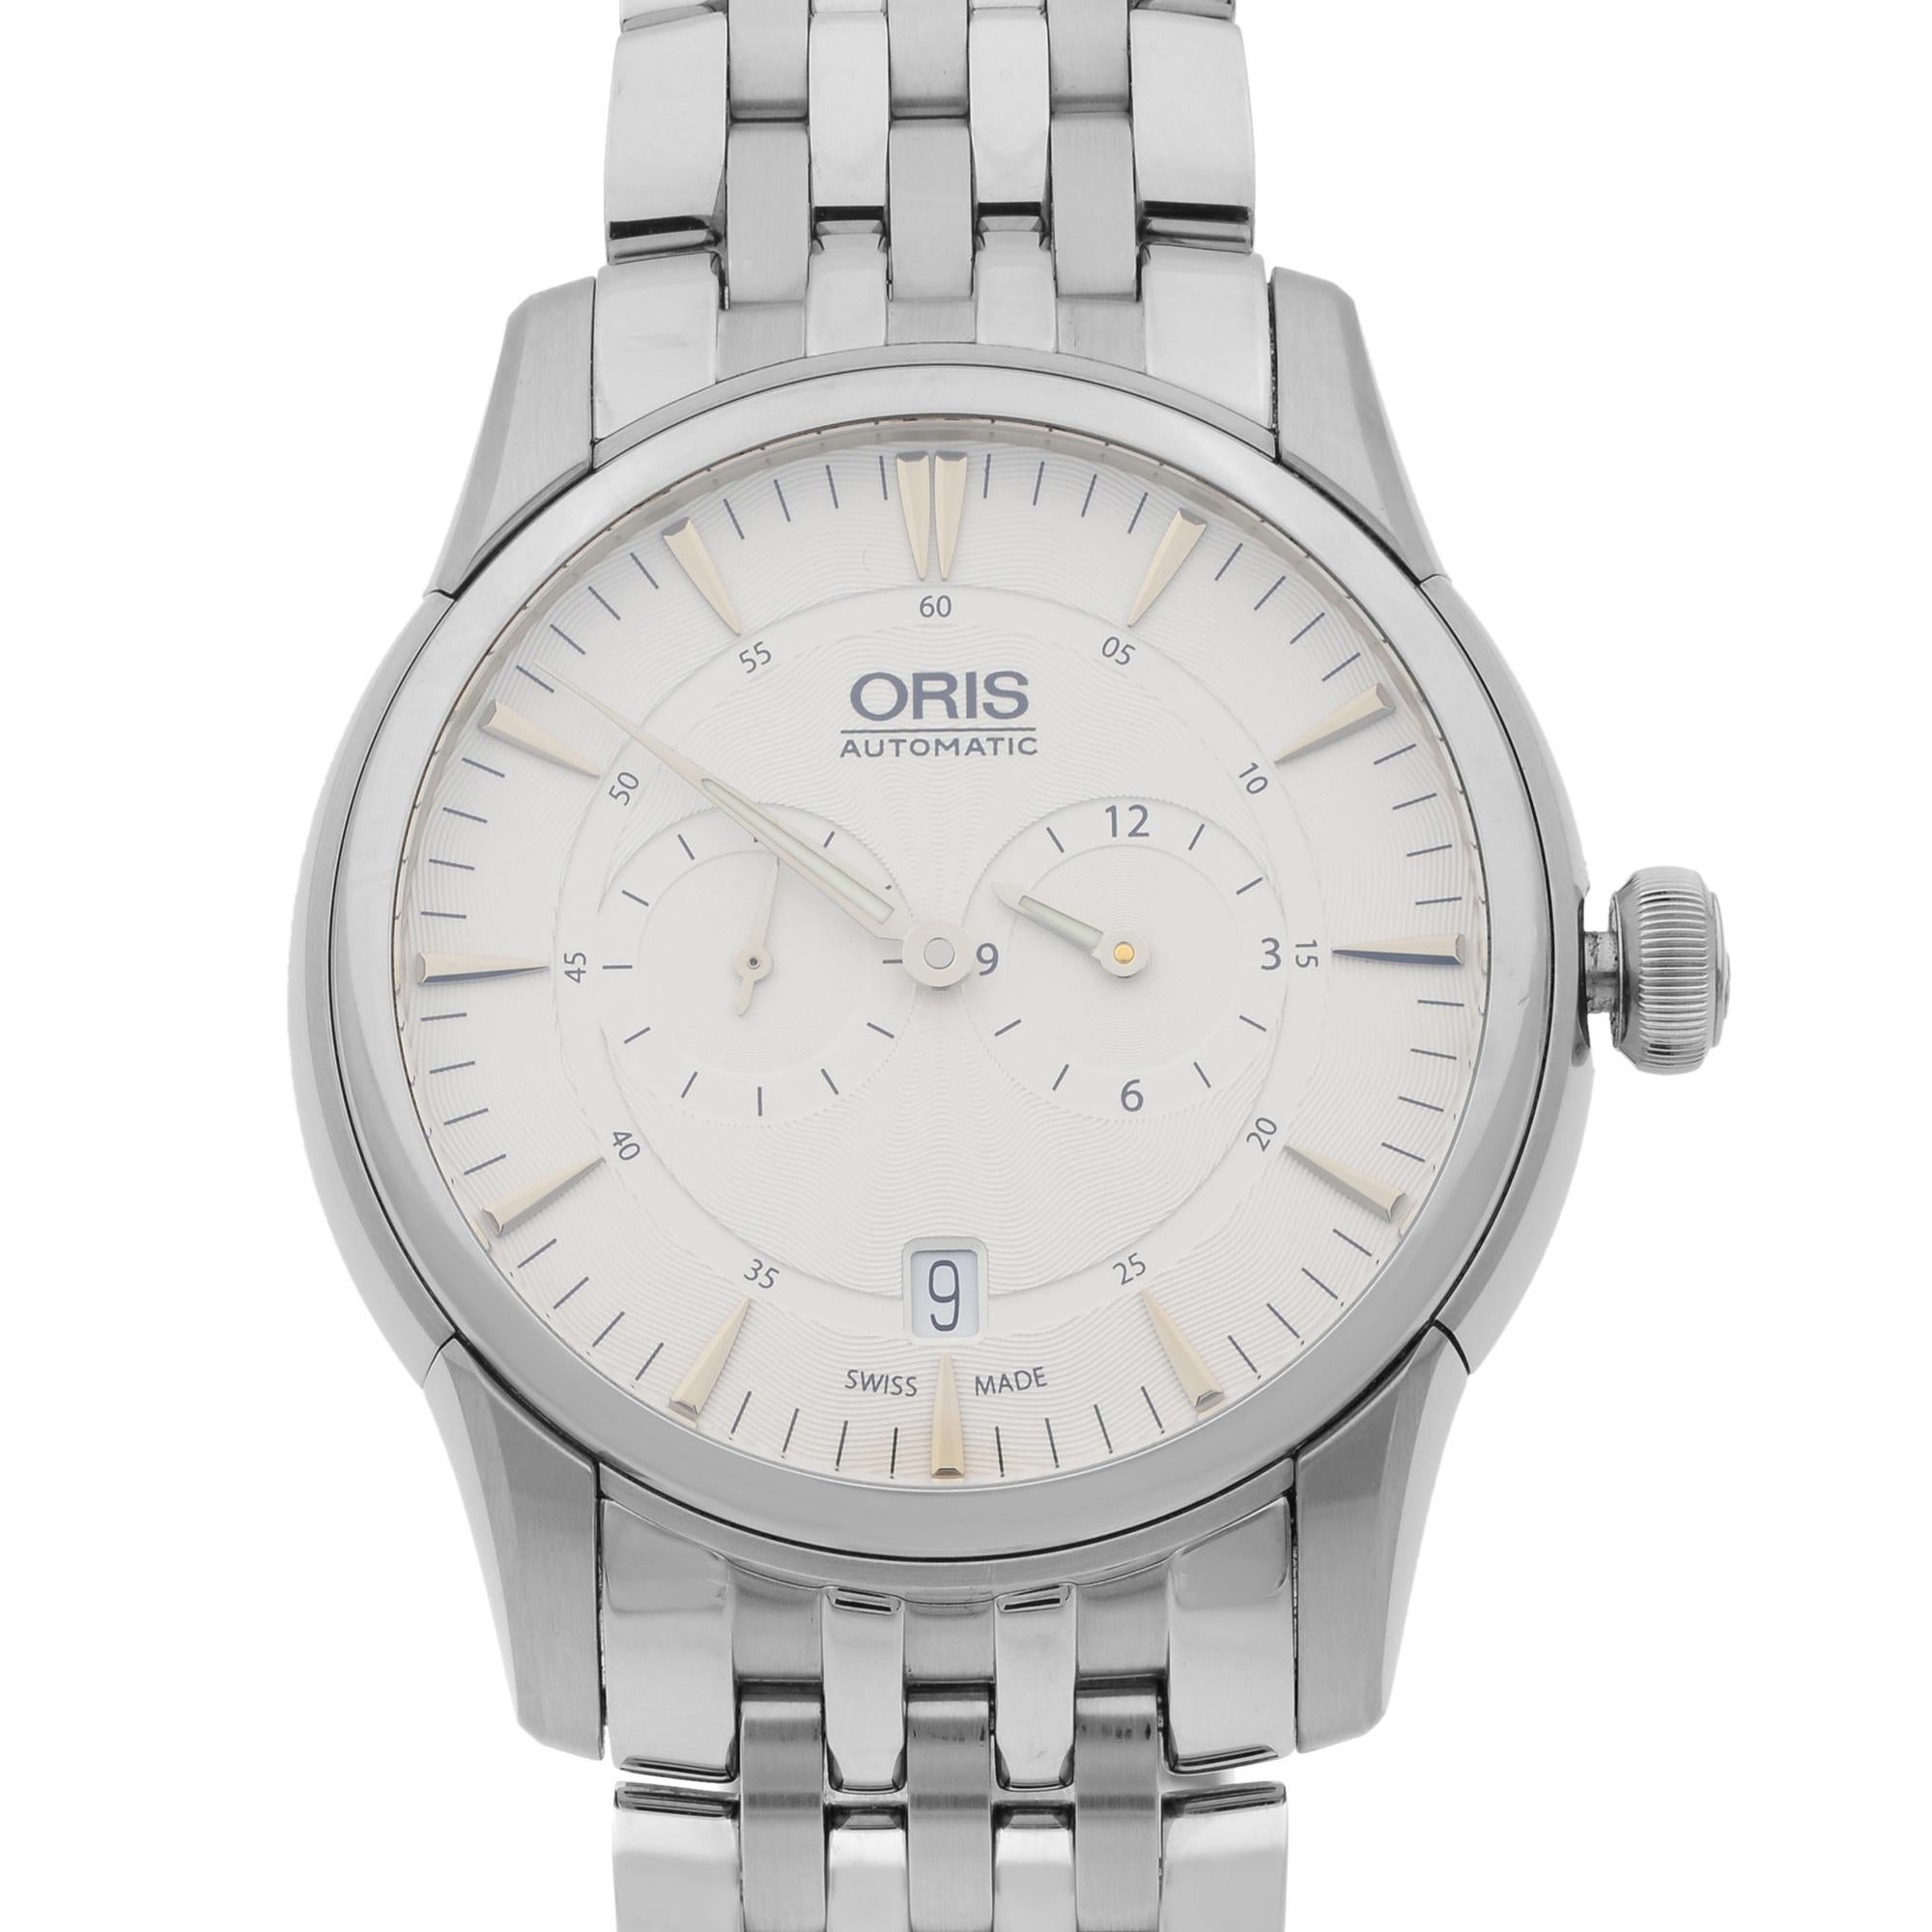 This display model Oris Artelier  01 749 7667 4051-07 8 21 77 is a beautiful men's timepiece that is powered by mechanical (automatic) movement which is cased in a stainless steel case. It has a round shape face, date indicator, small seconds